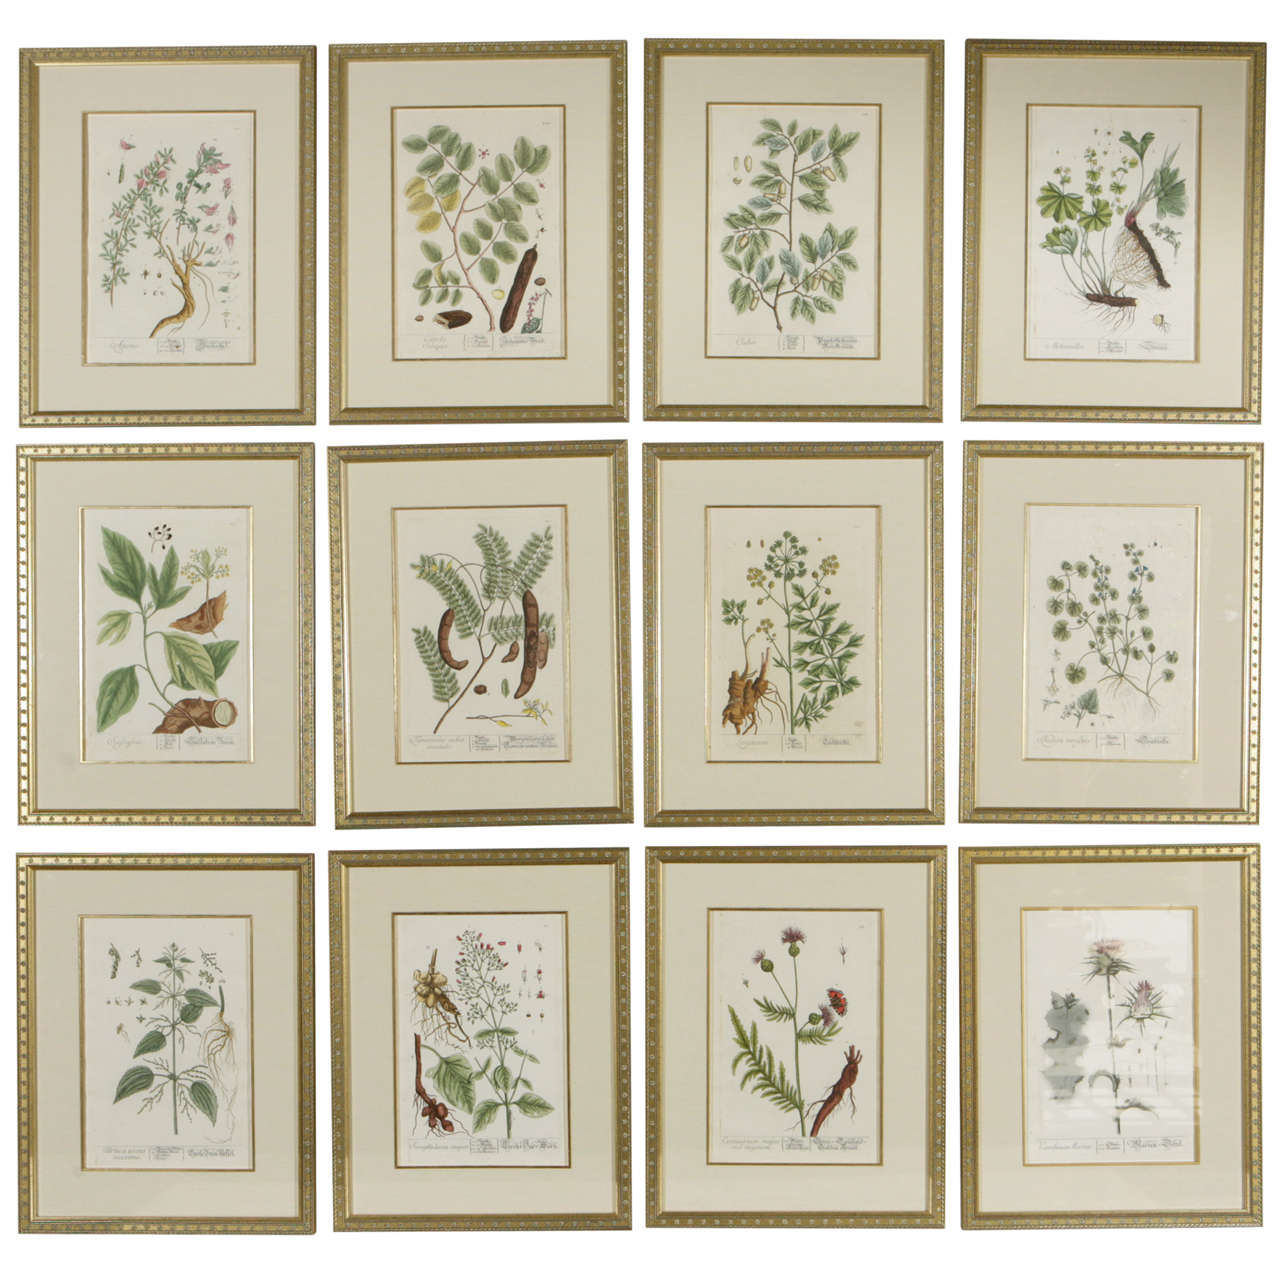 18th century Hand Tinted Assorted Framed Botanicals by Elizabeth Blackwell.  The image measurement is 12.5 inches h x 8.5 inches w.  The framed prints are priced individually. The price listed below is for nine framed Botanical.